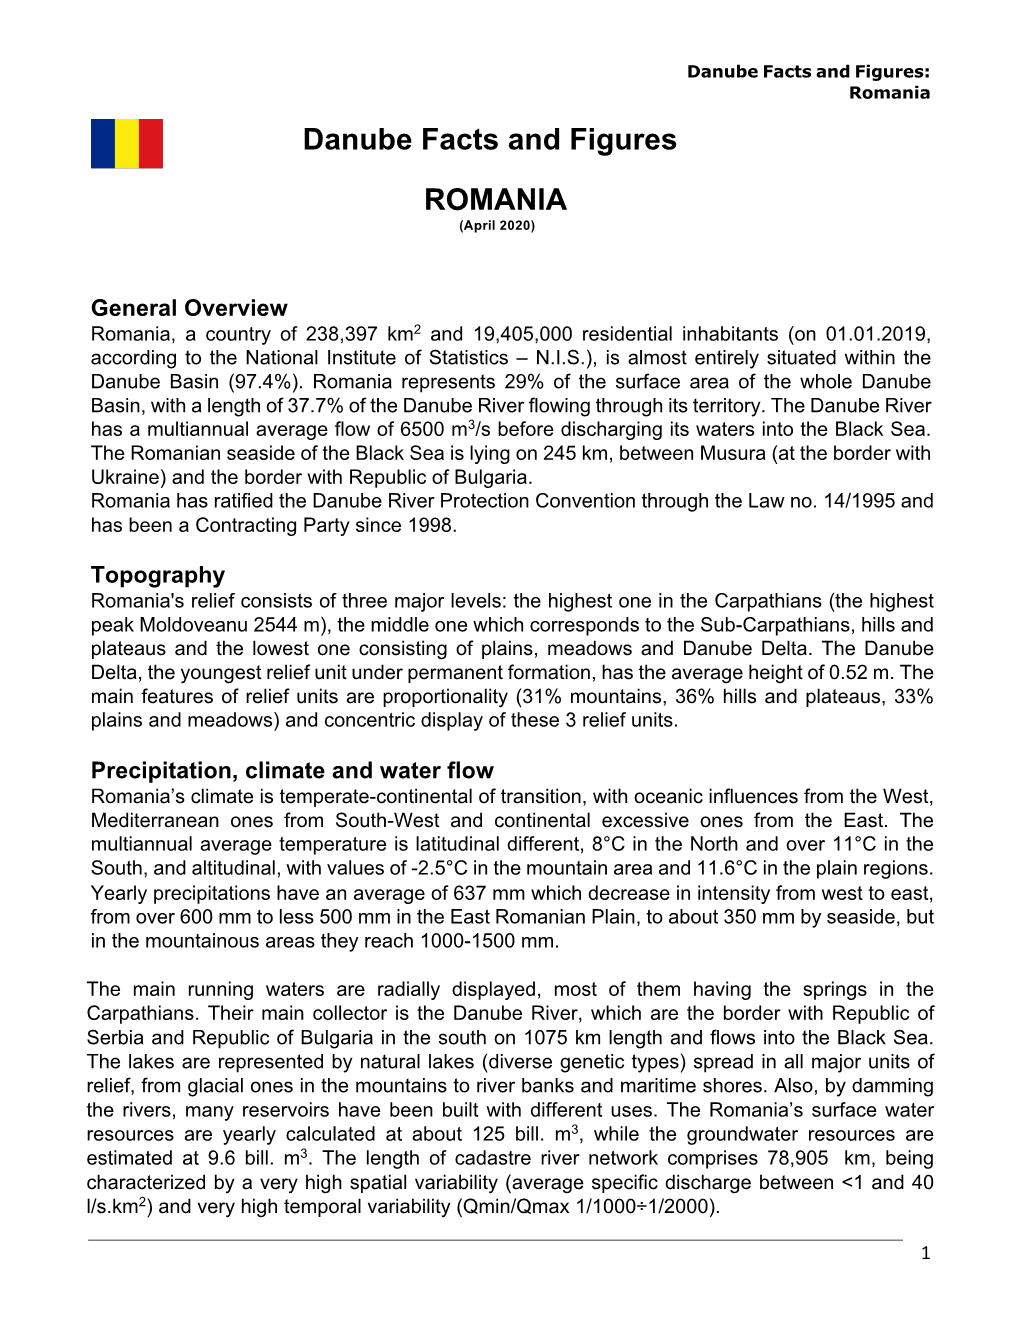 Danube Facts and Figures ROMANIA